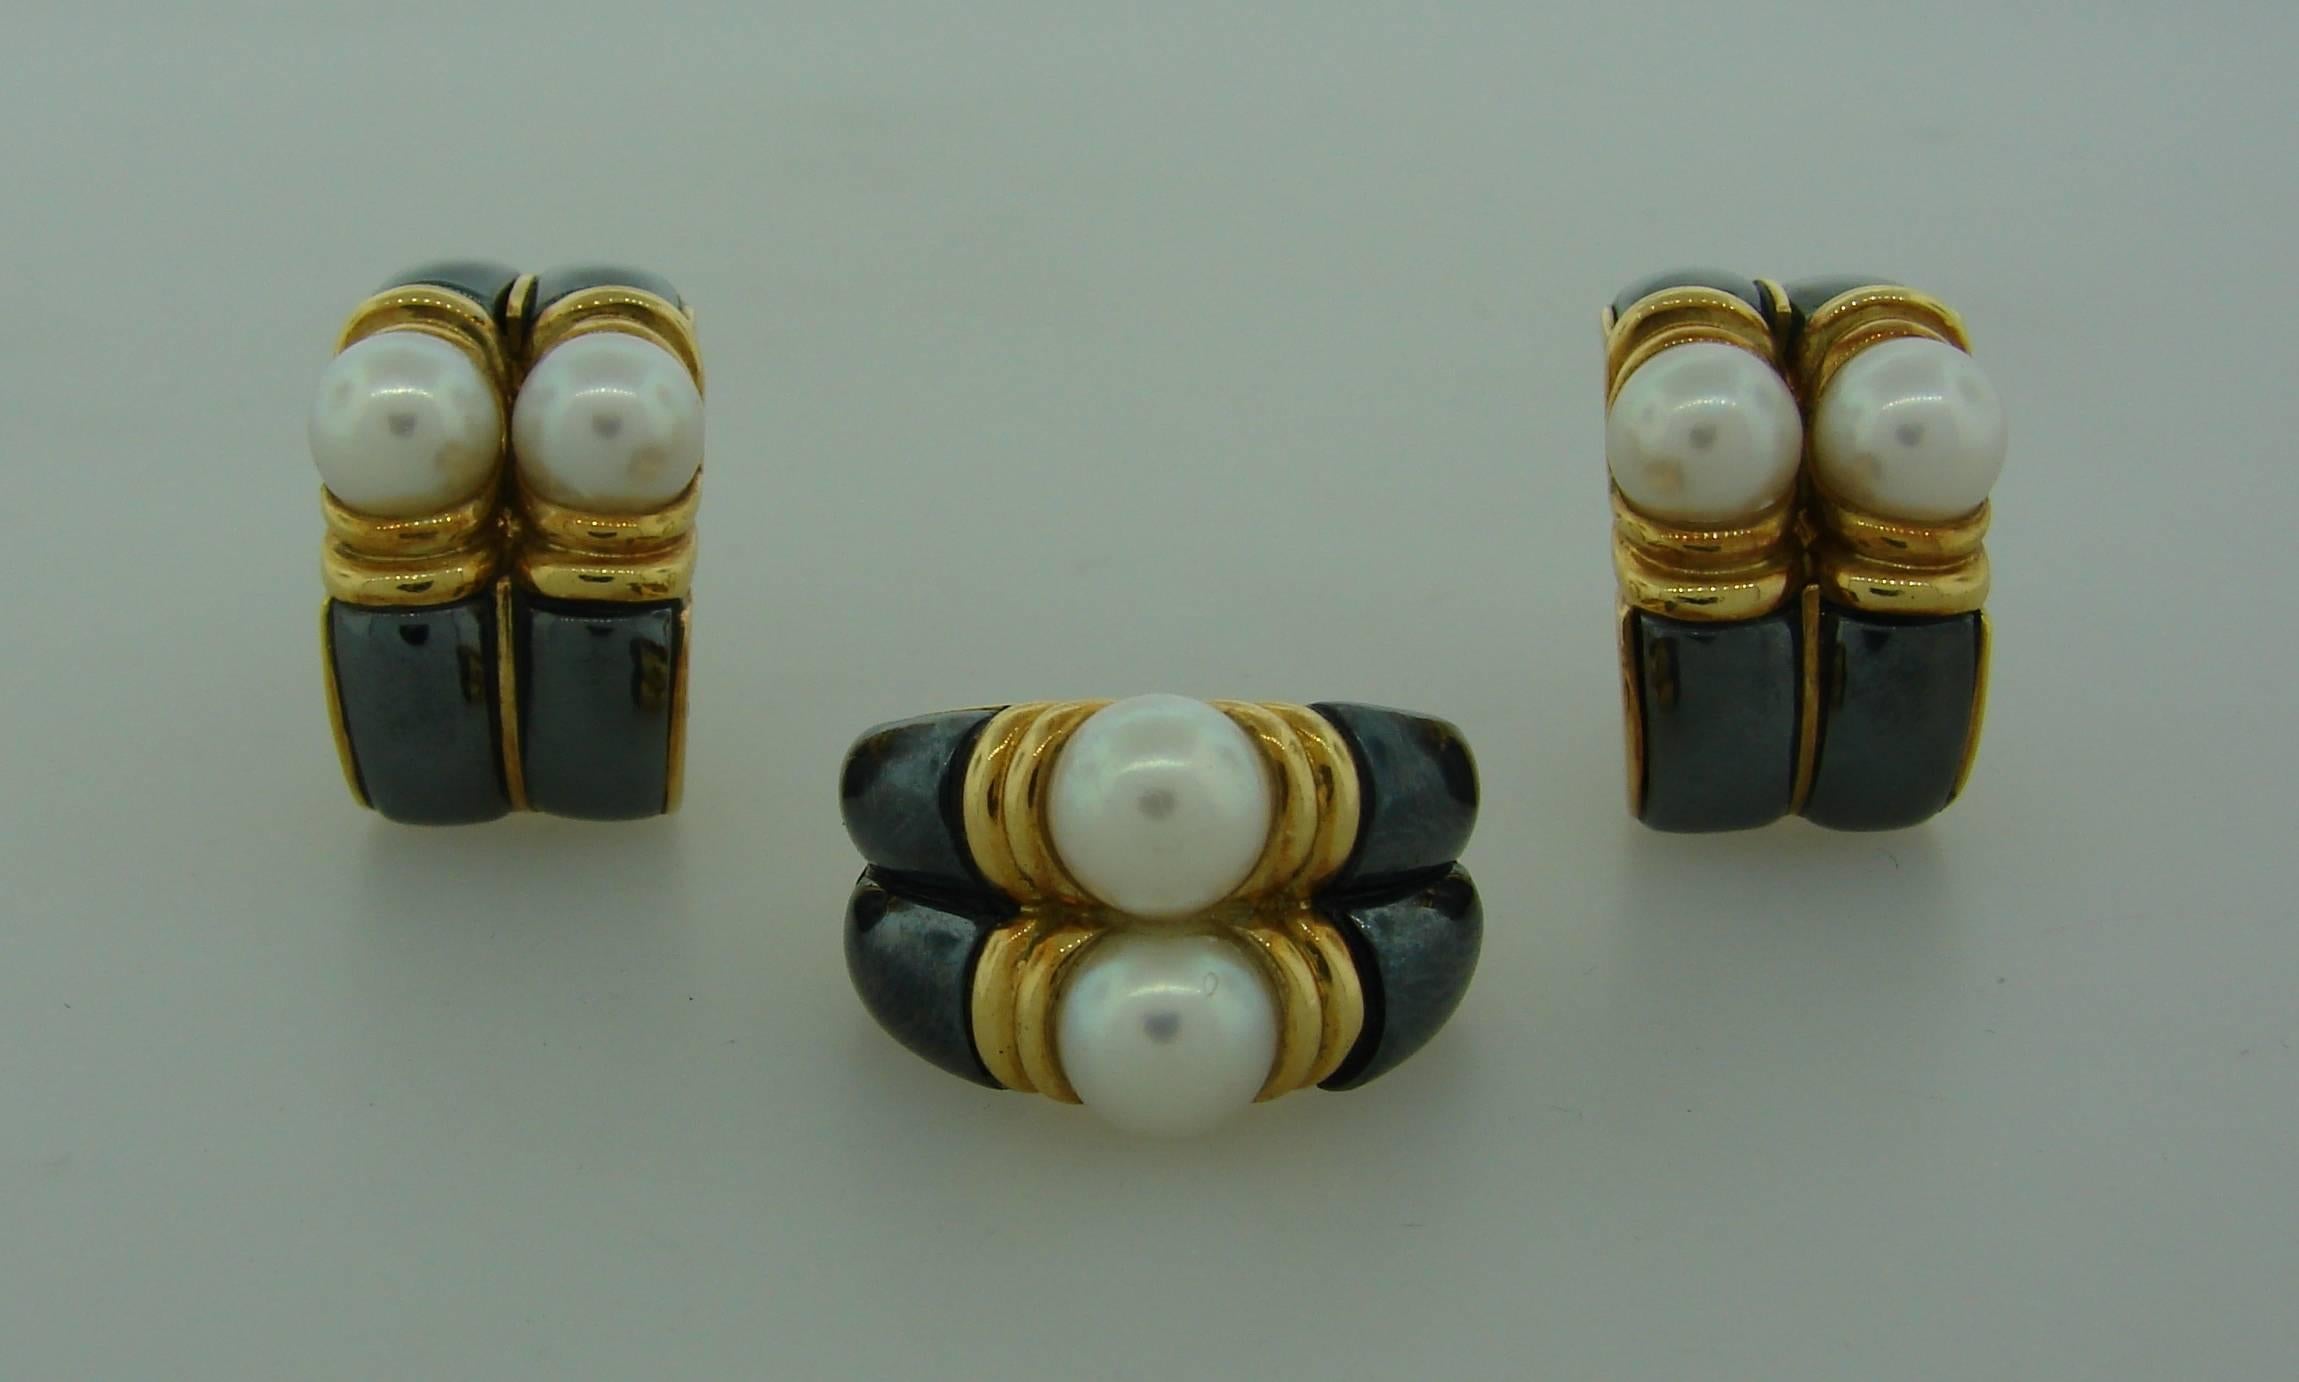 Elegant and chic set consisting of a ring and a pair of earrings. Created by Bulgari in Italy in the 1980's. The set in made of 18 karat (stamped) yellow gold, hematite and Akoya pearls. Both, the pearls and the hematite, have this mysterious luster